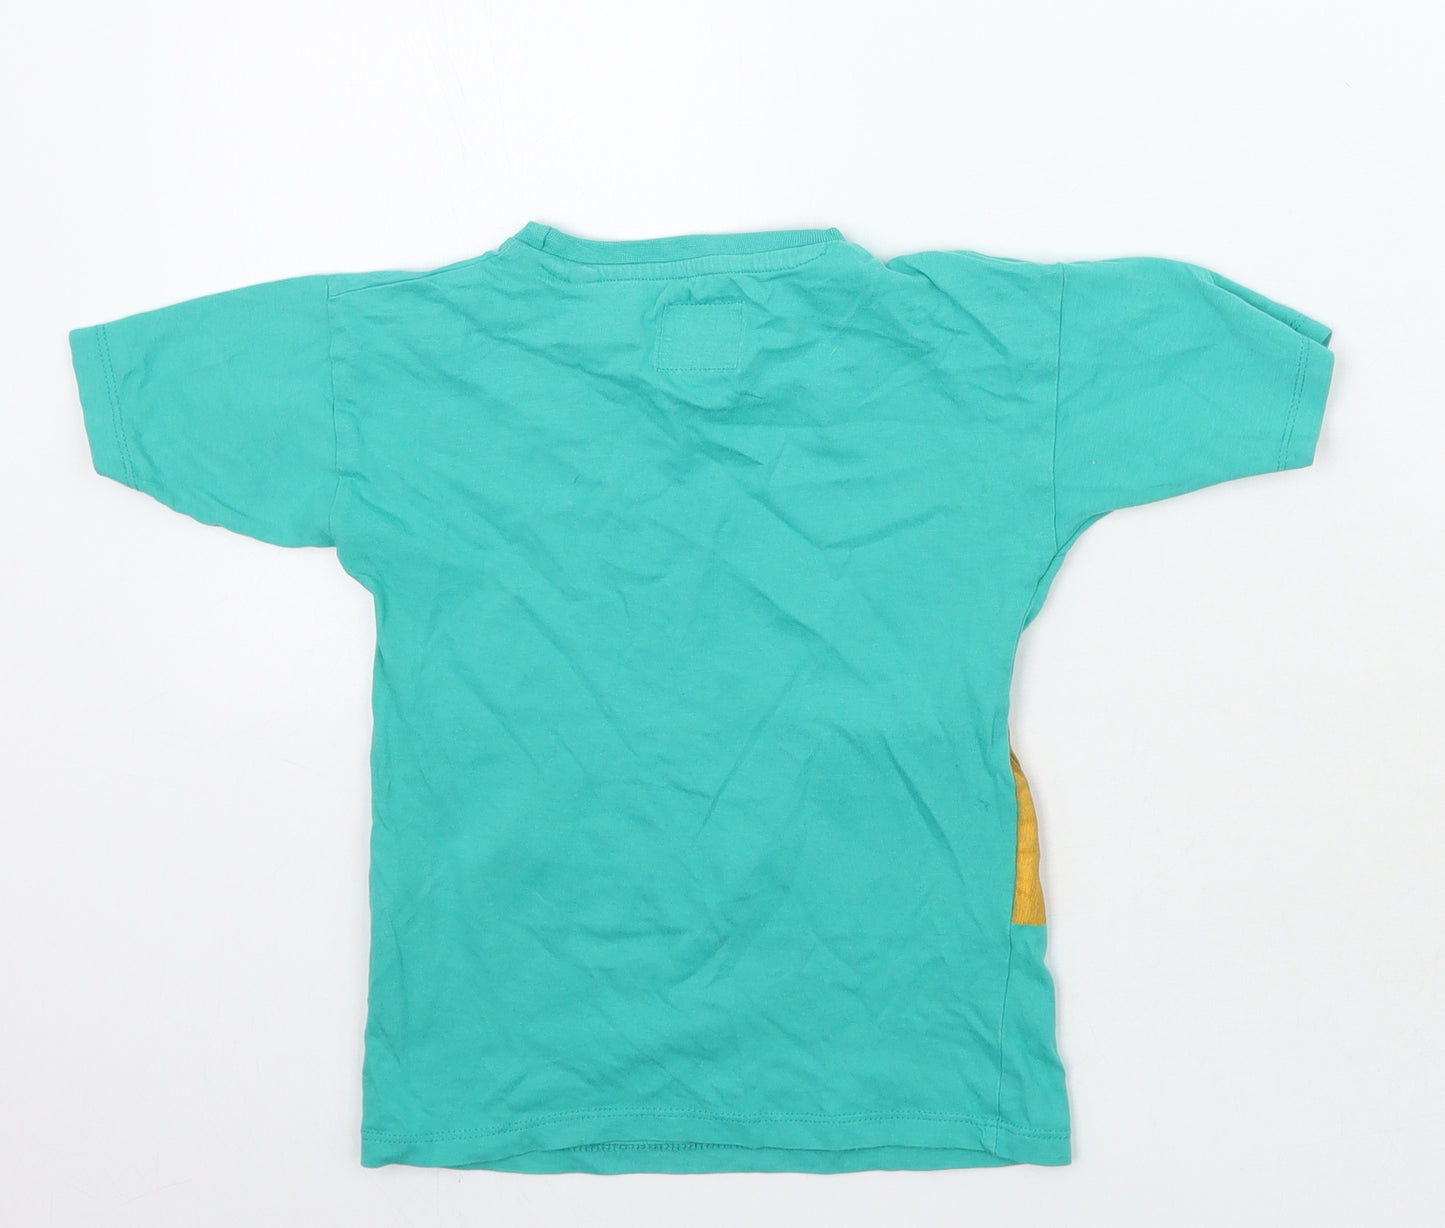 Steel & Jelly Boys Green   Basic T-Shirt Size 2-3 Years